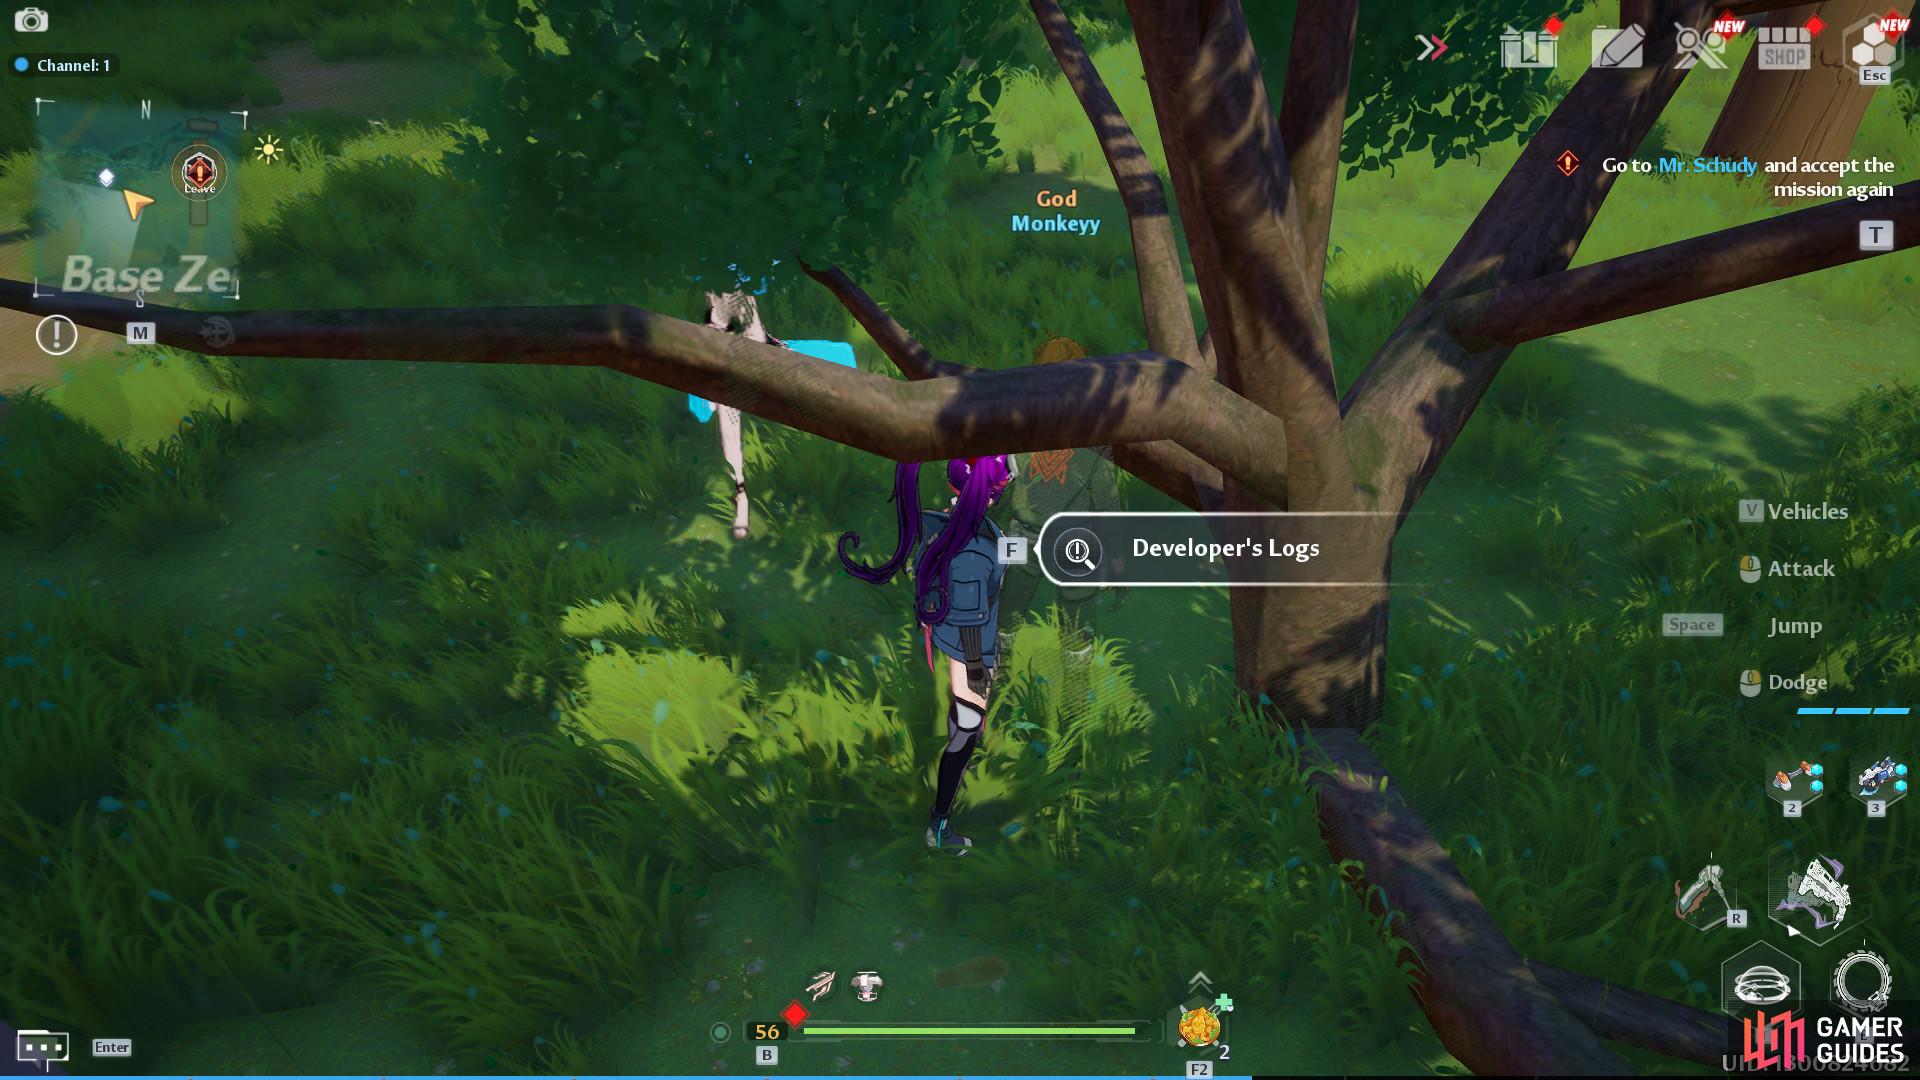 The first Dev Log is to the east of the plane next to a tree in the main base.